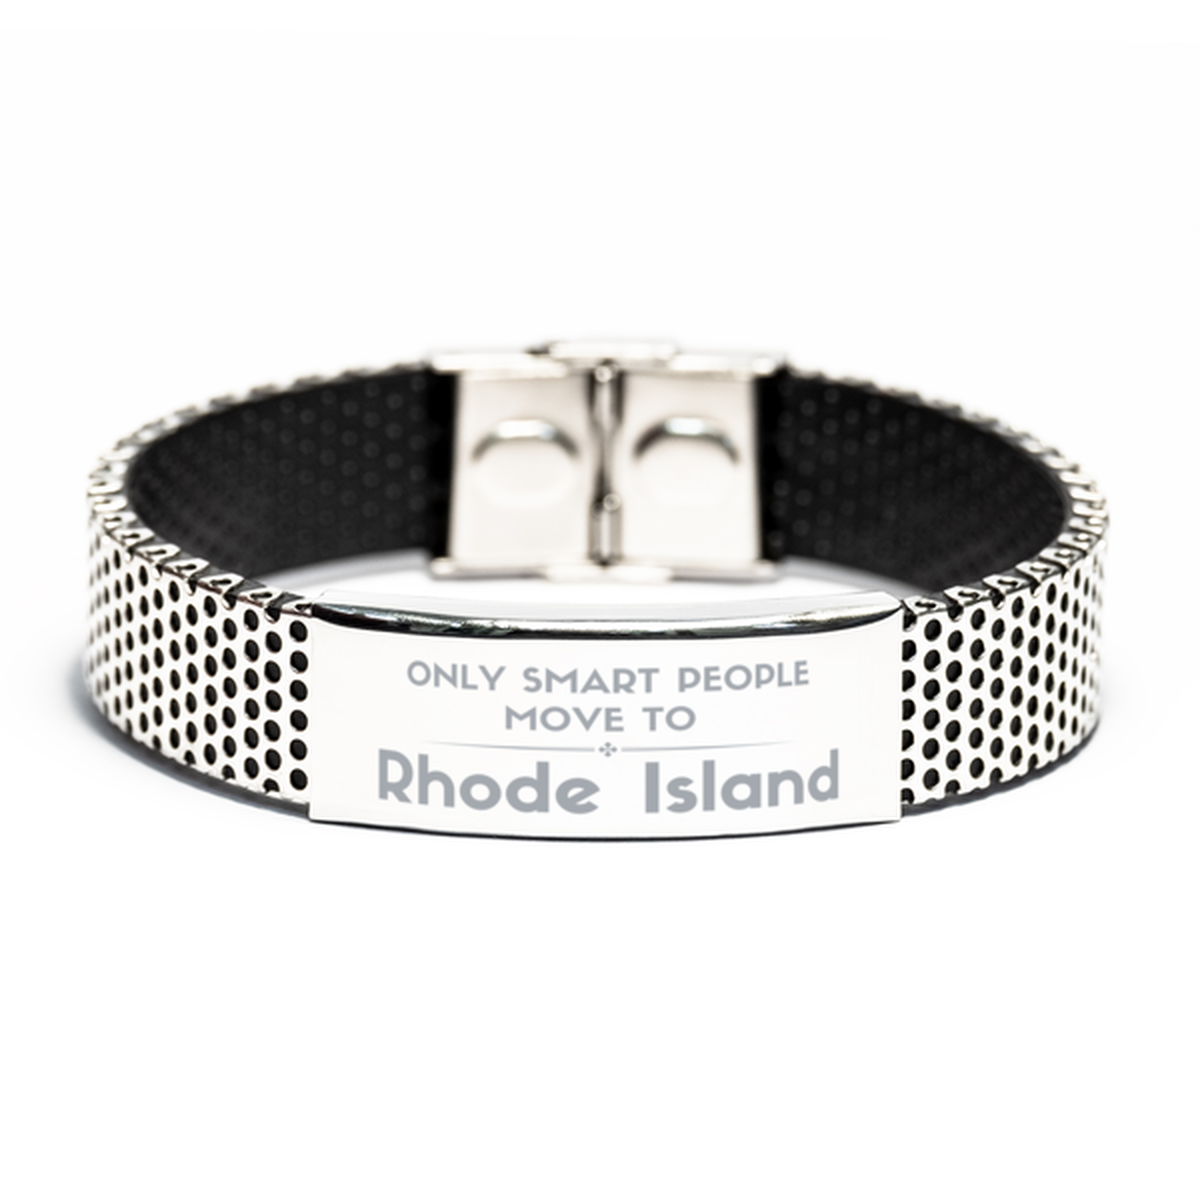 Only smart people move to Rhode Island Stainless Steel Bracelet, Gag Gifts For Rhode Island, Move to Rhode Island Gifts for Friends Coworker Funny Saying Quote